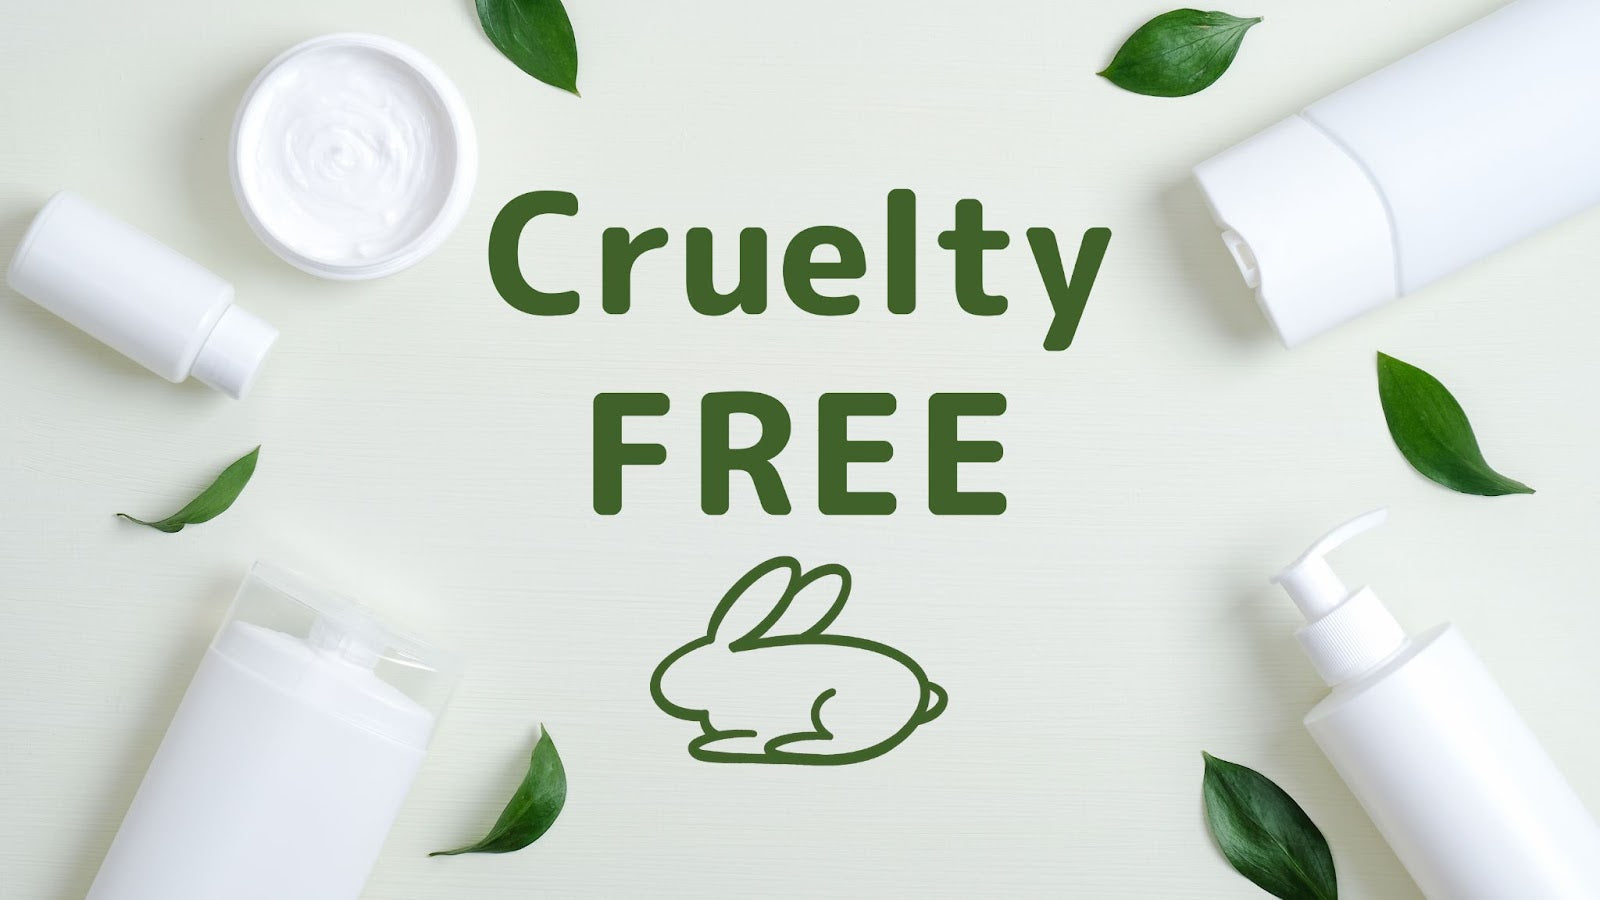 Cruelty-free skincare image with cute rabbit, green leaves, and cruelty free text on white background